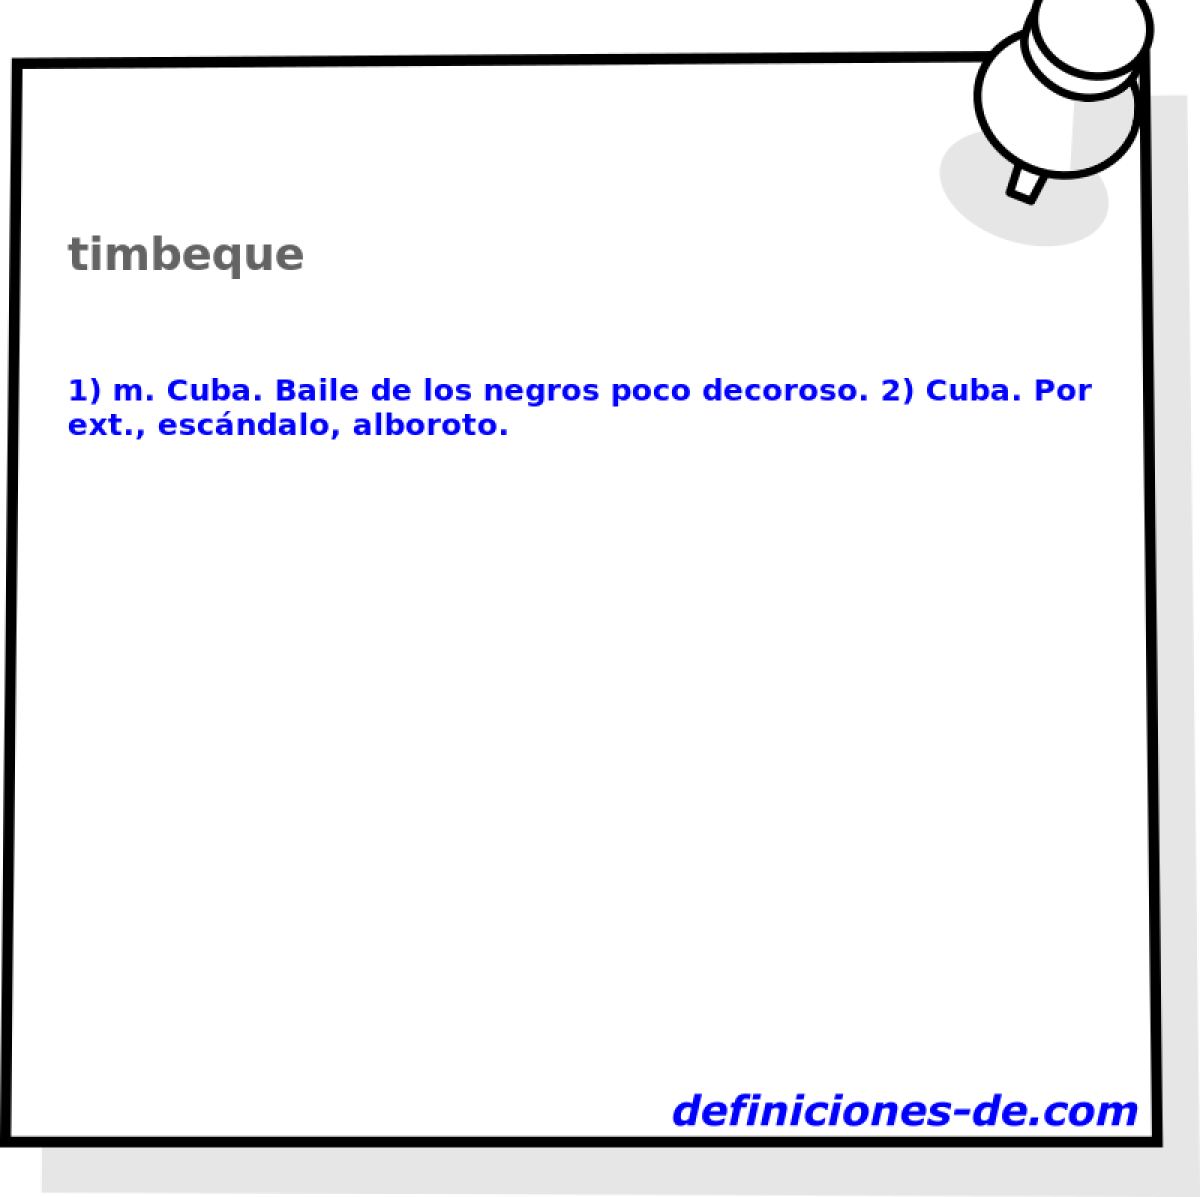 timbeque 